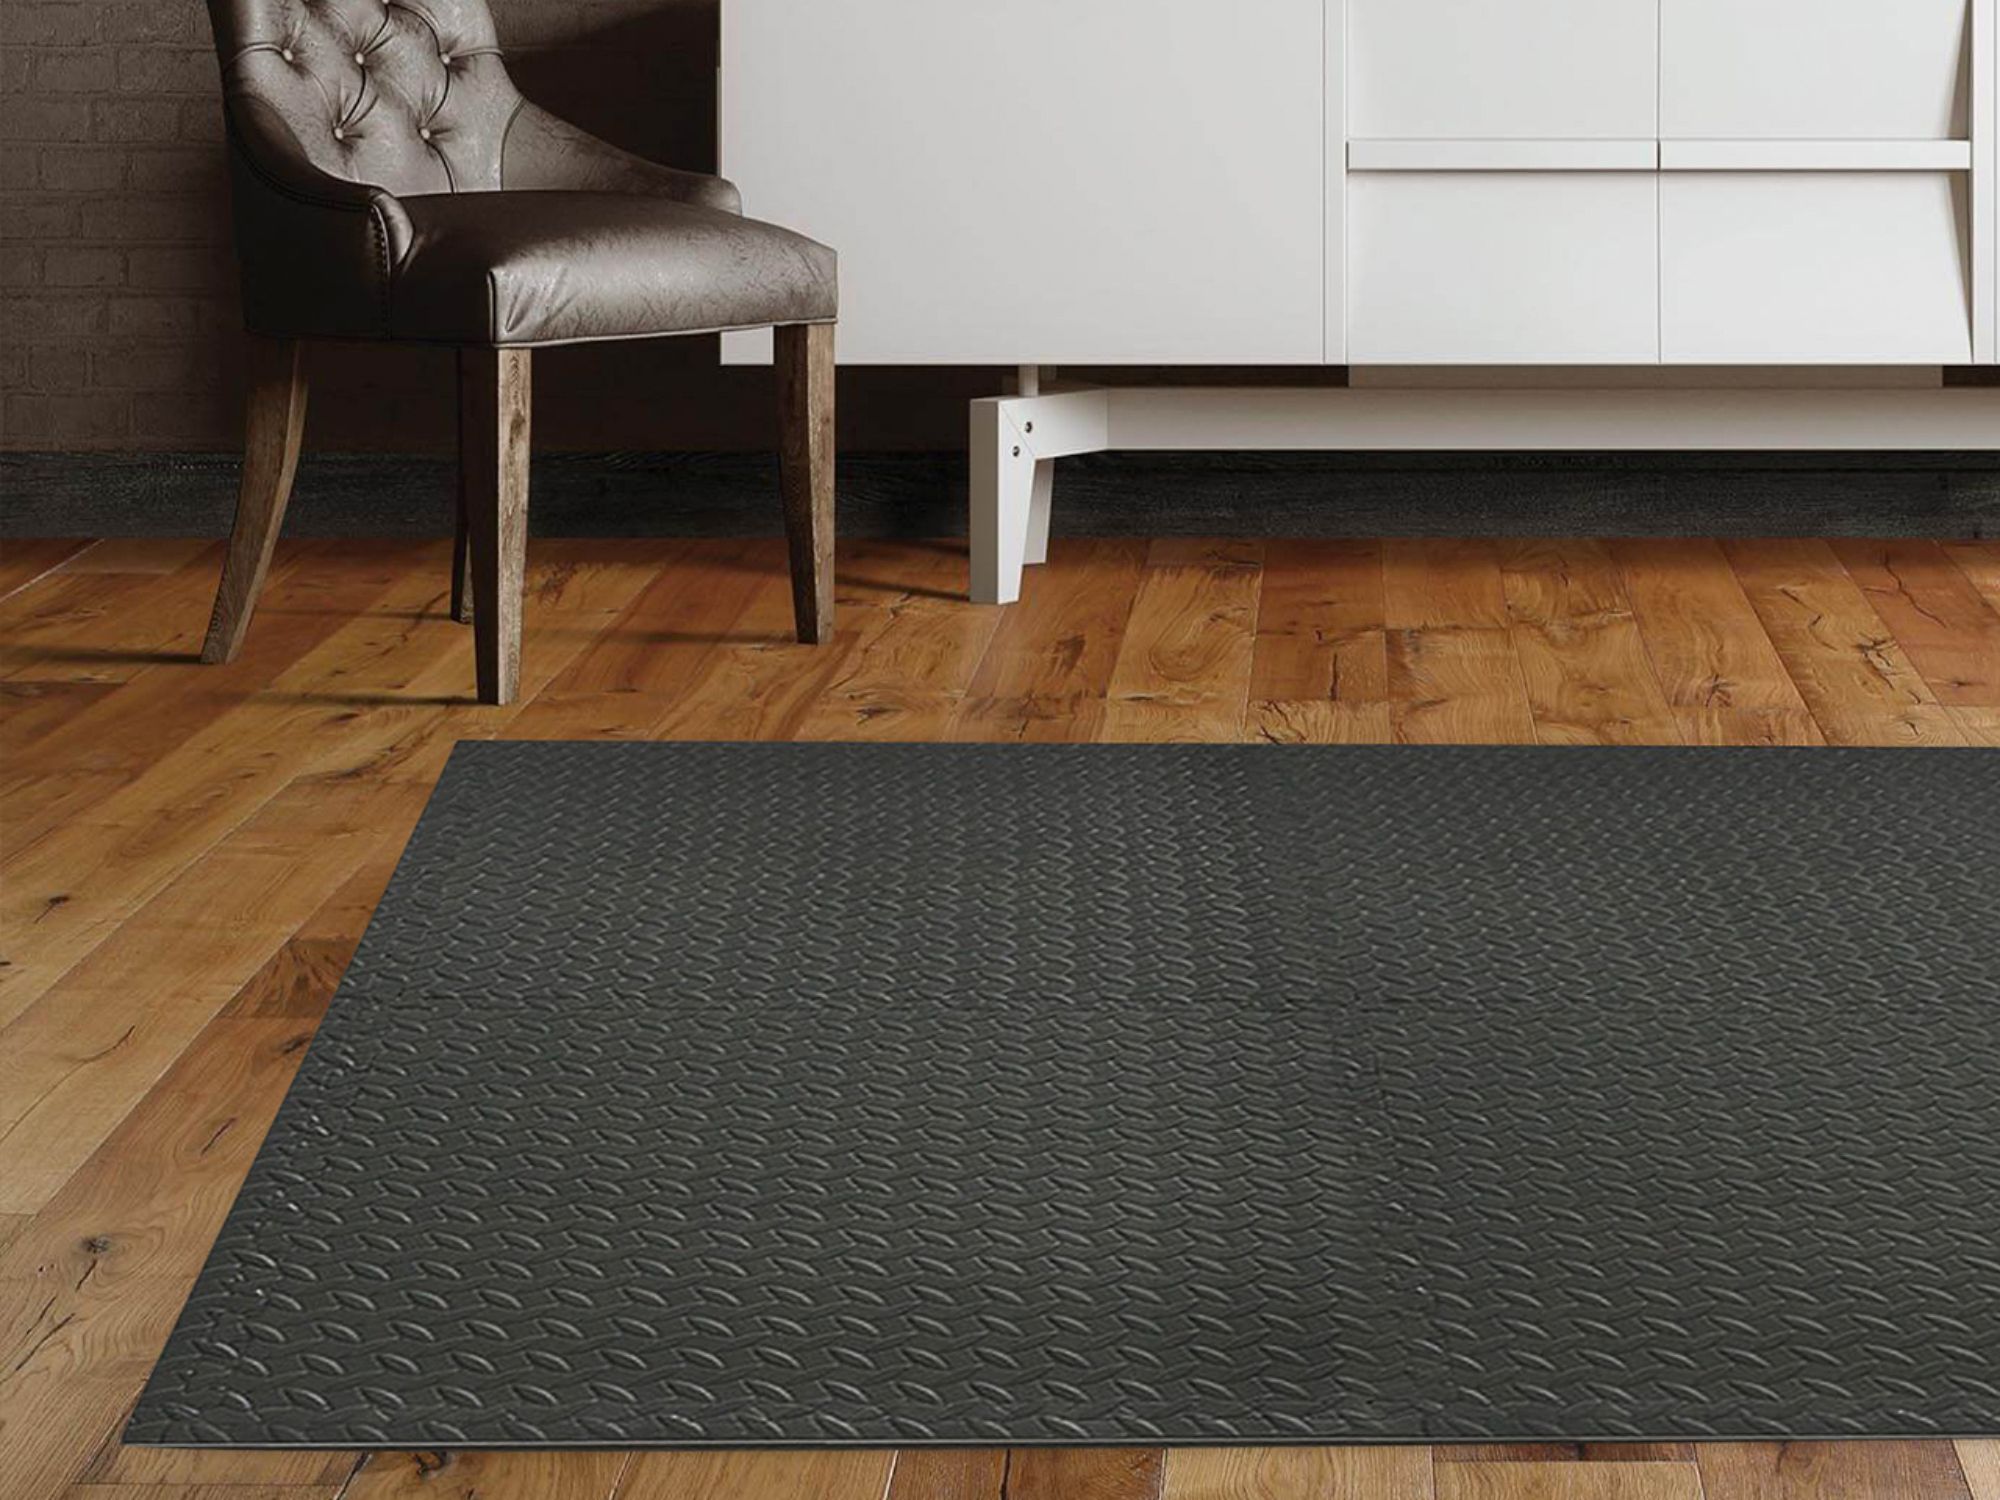 10 Best Home Gym Flooring Options Of 2022 - Workout Mats And More